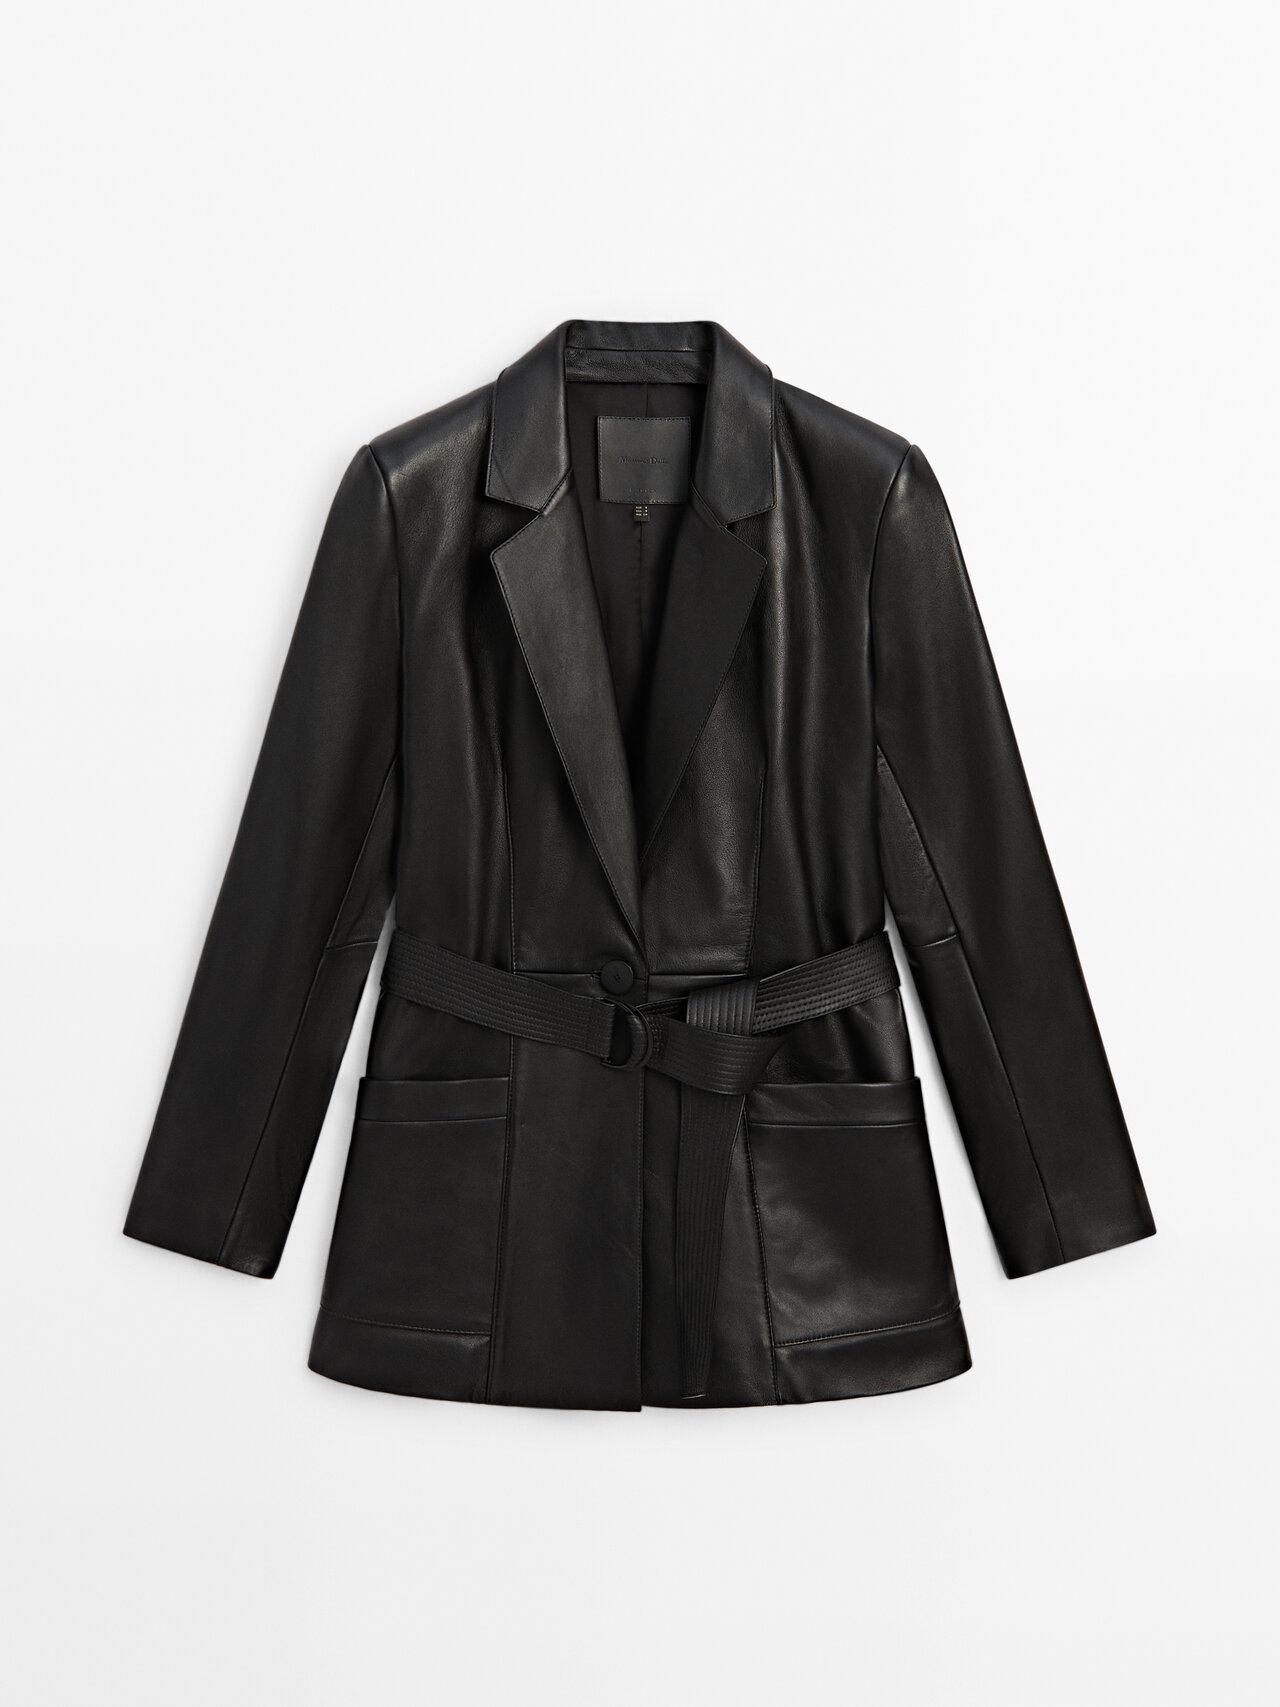 MASSIMO DUTTI Belted Nappa Leather Blazer in Black | Lyst